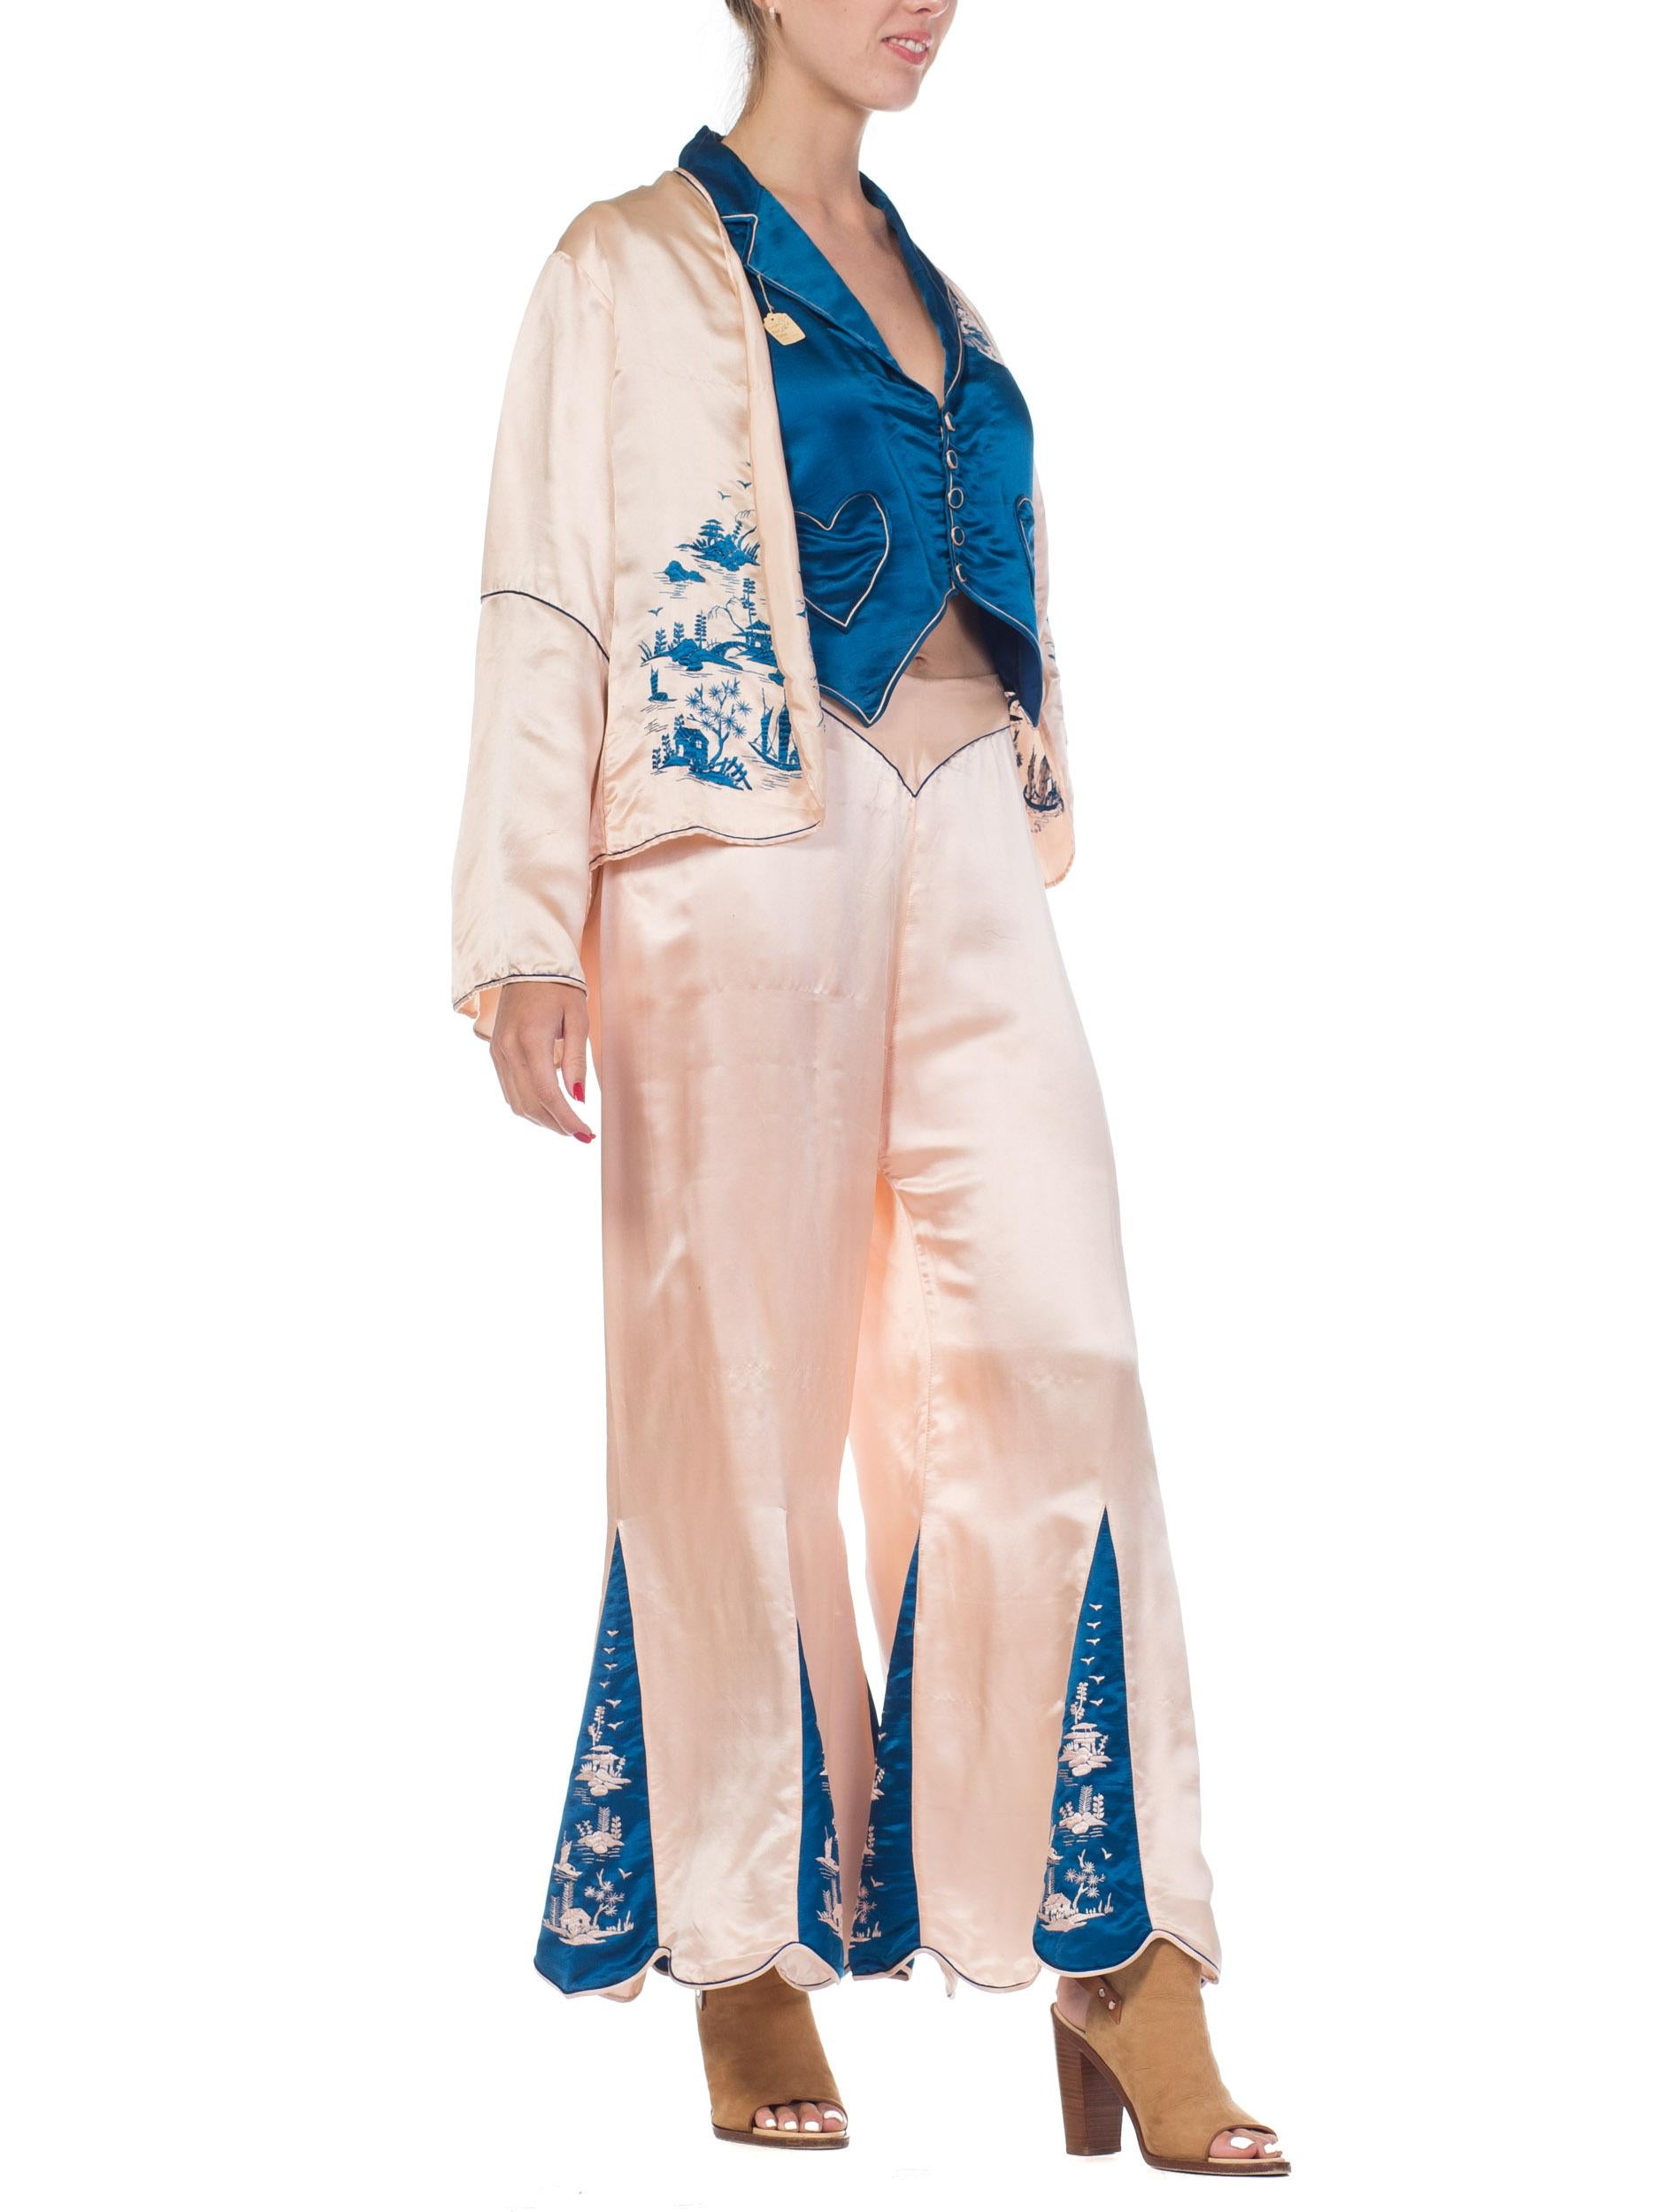 1920s 3 Piece Blue and Cream Chinese Beach Pajamas With Hand Embroidery 9